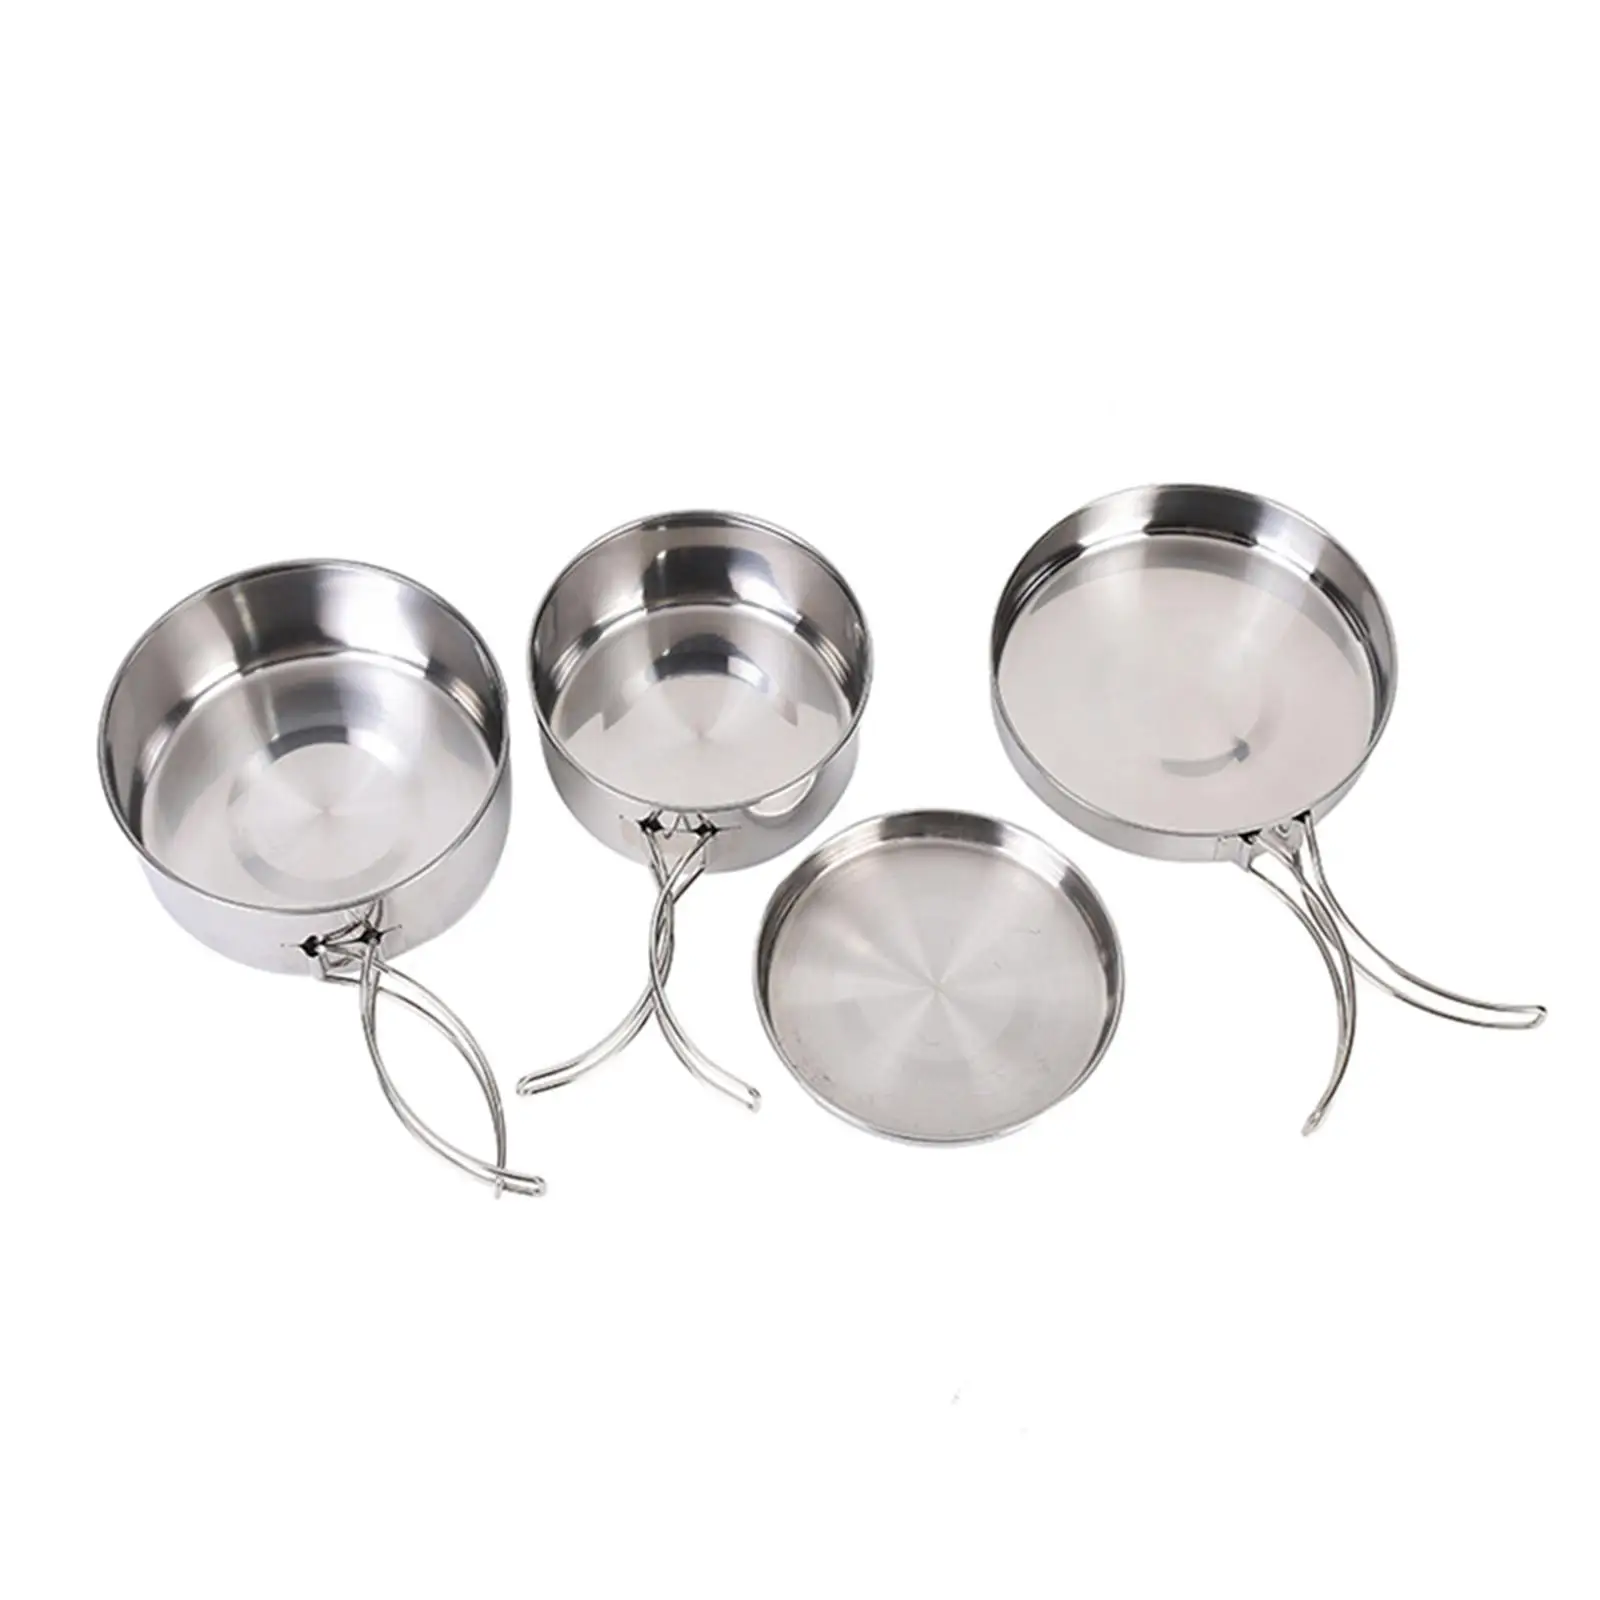 Camping Pots and Pans Set Camping Cooking Pots Camping Cooking Cookware Set Portable Large Capacity for Outdoor Hiking Touring